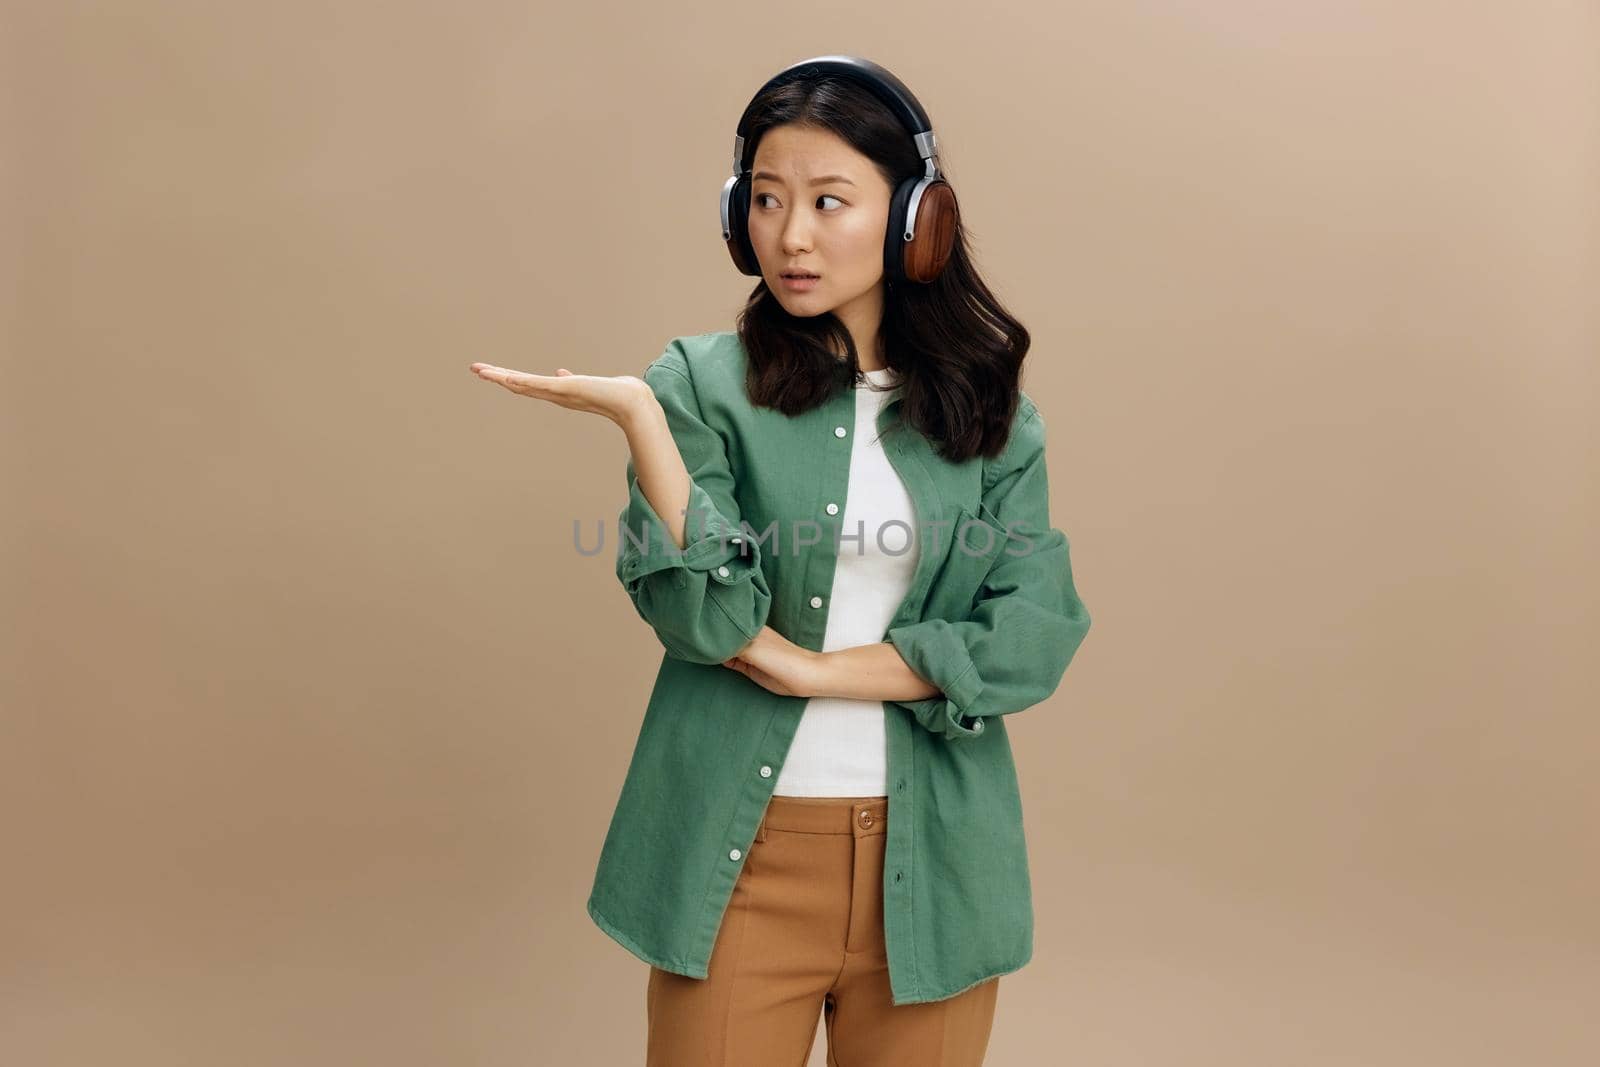 Wow, look here. Korean shocked young woman in khaki green shirt headphones hold palm up aside posing isolated on beige pastel studio background. Cool fashion offer. Music App Platform Ad concept